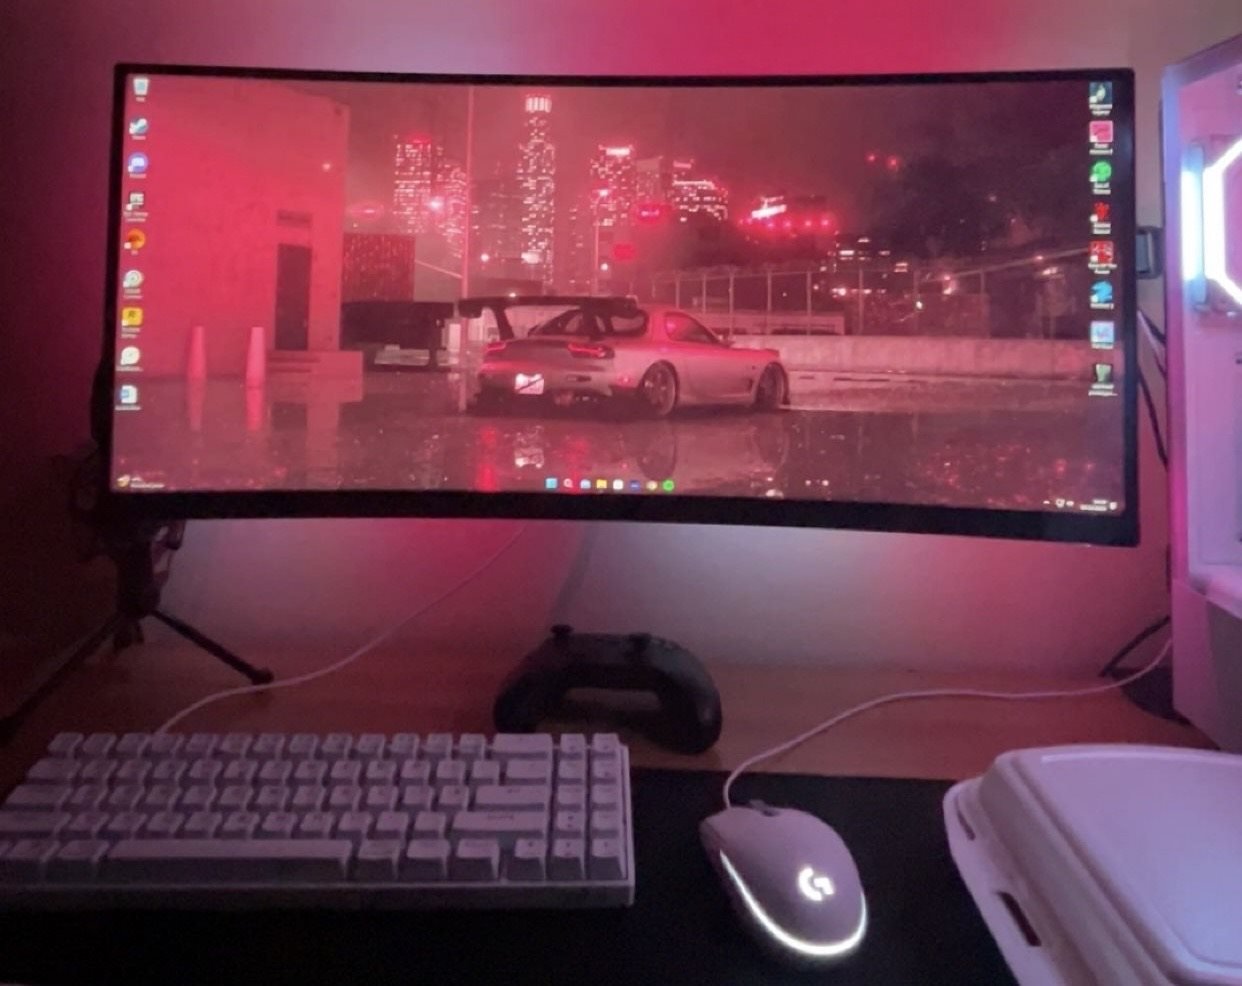 How to set up a gaming monitor - Reviewed